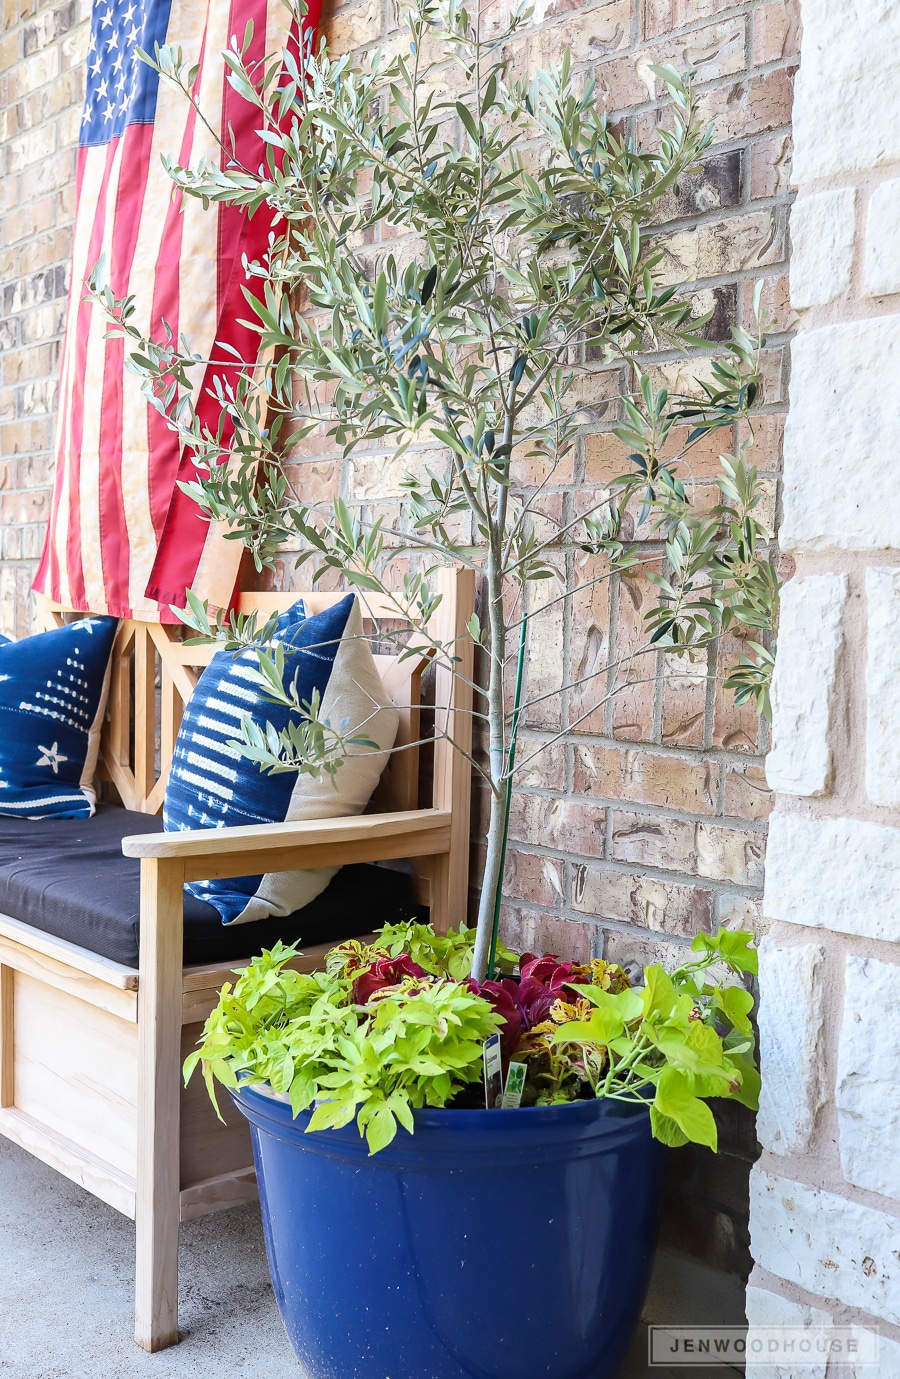 How to decorate your porch for the summer